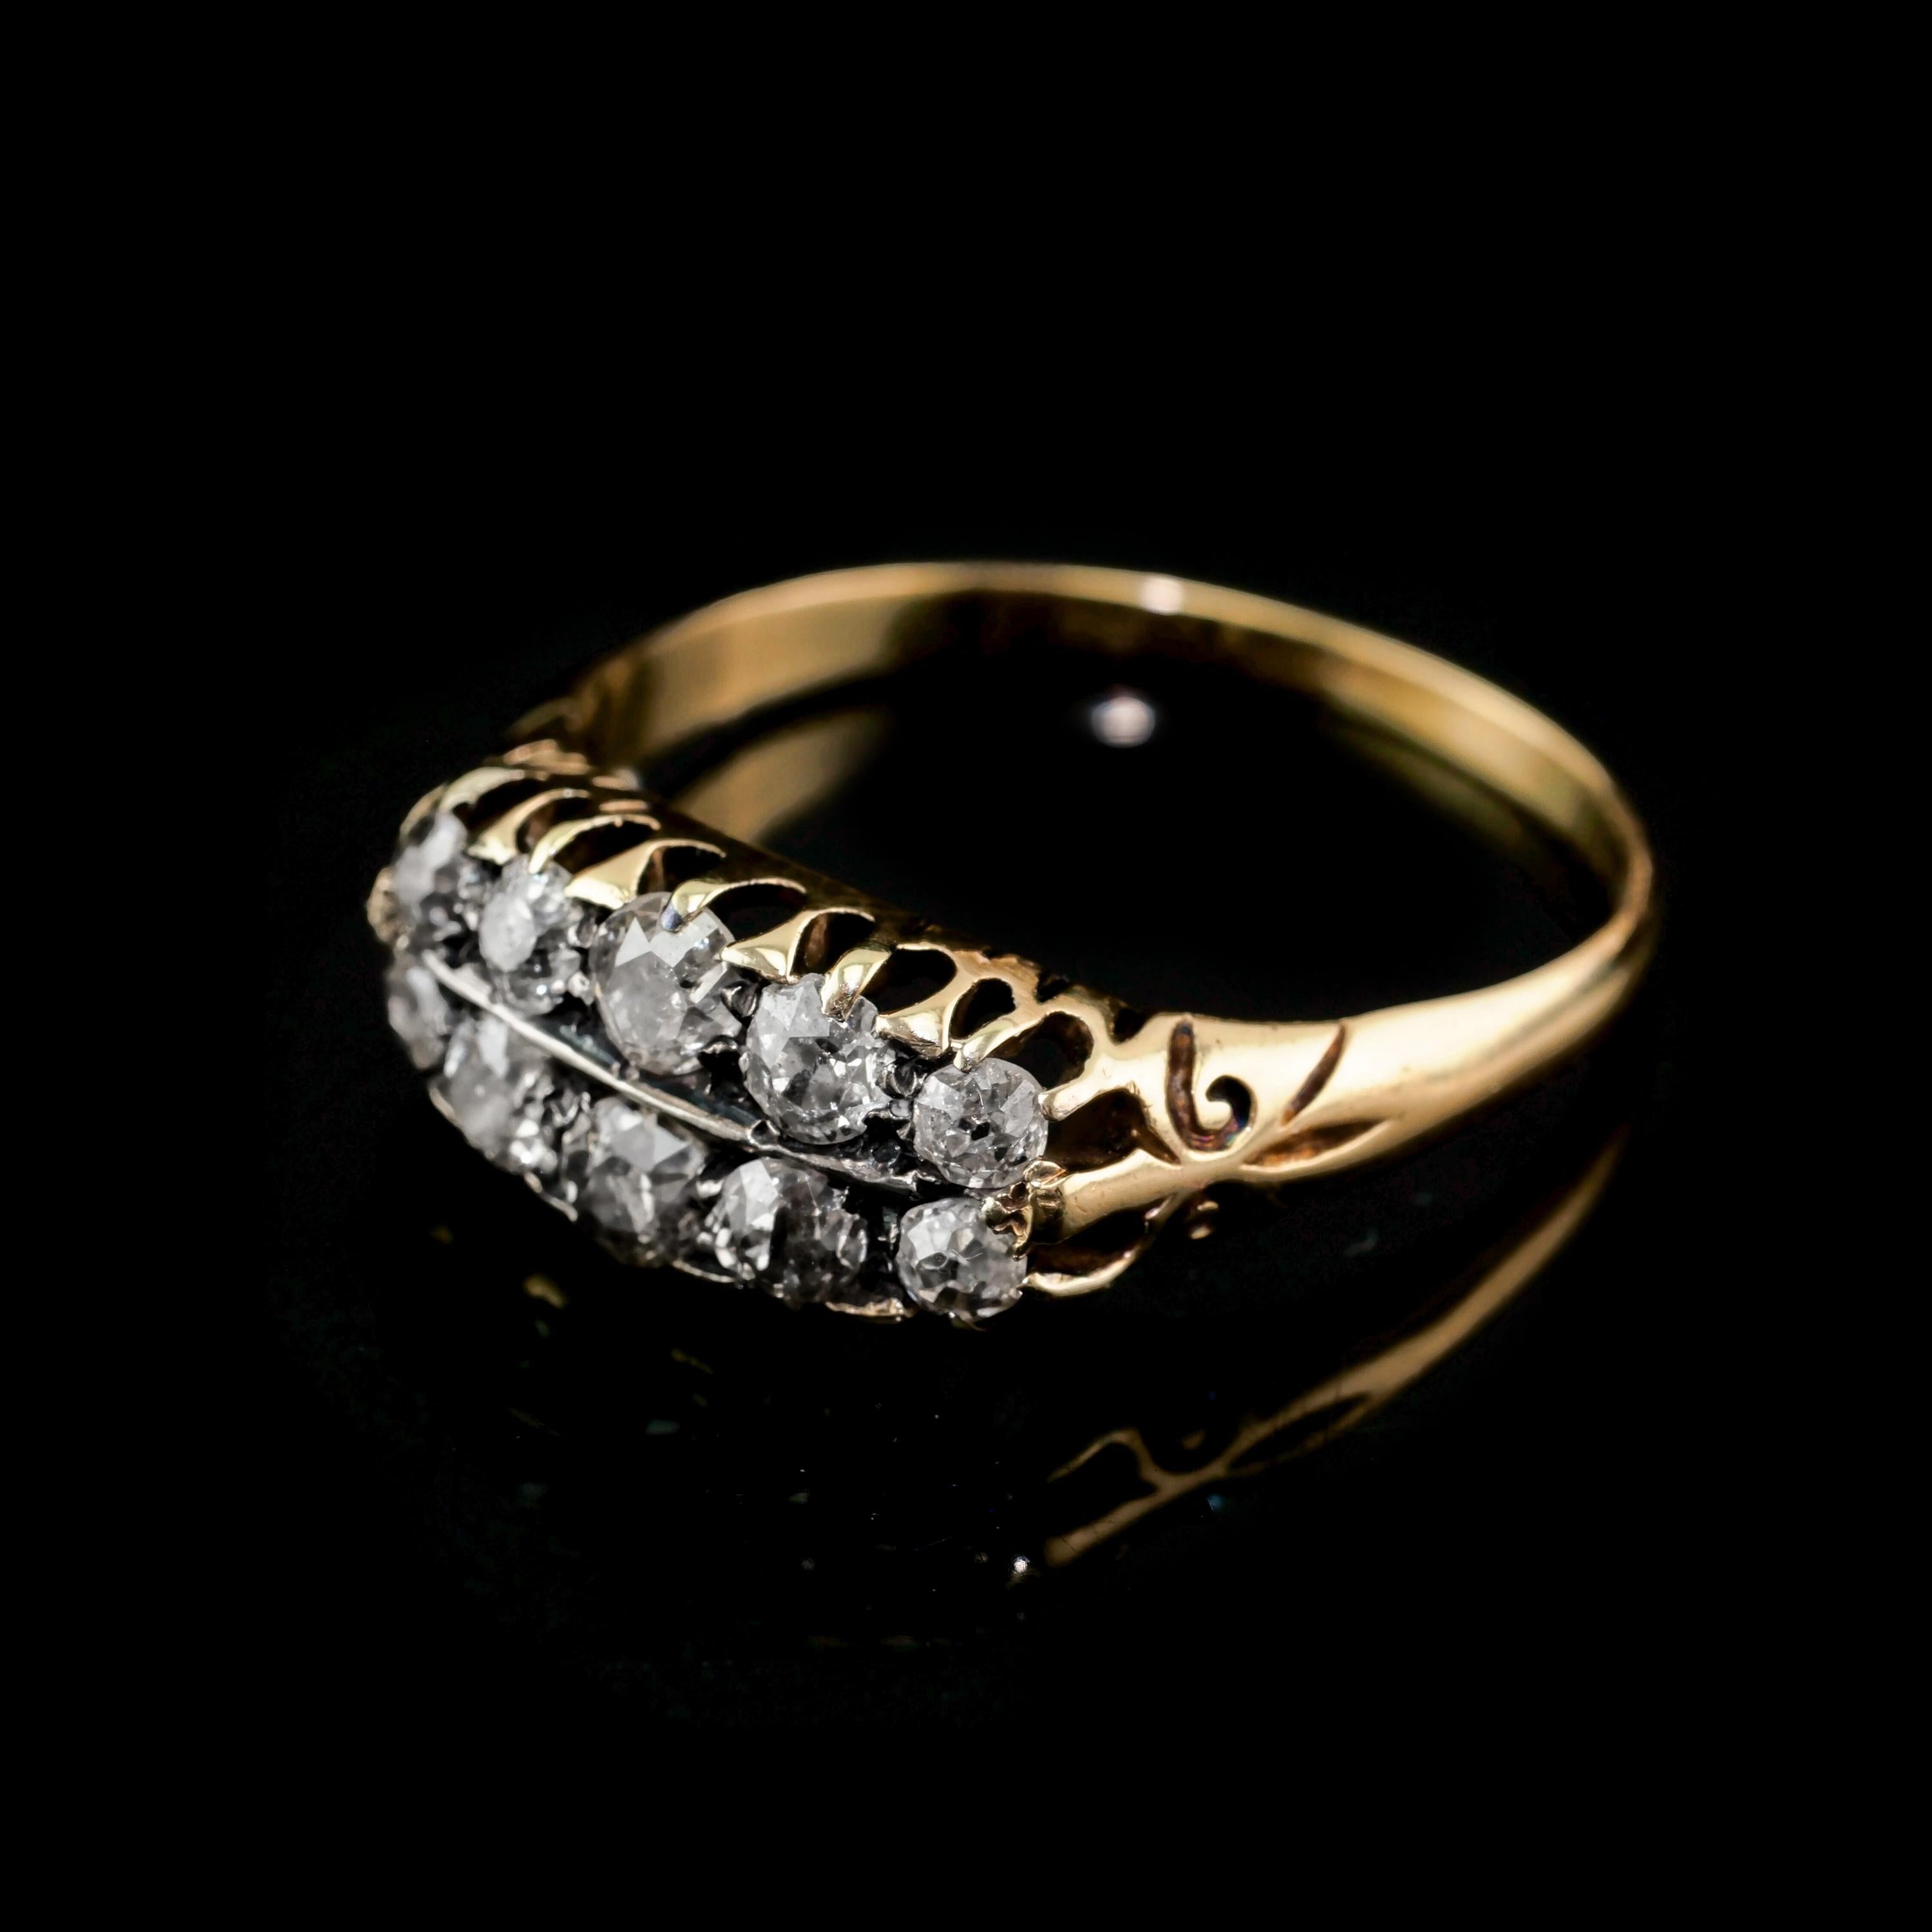 Antique Victorian 18K Gold Diamond Ring Old Cut - Boat Shaped c.1890 For Sale 13